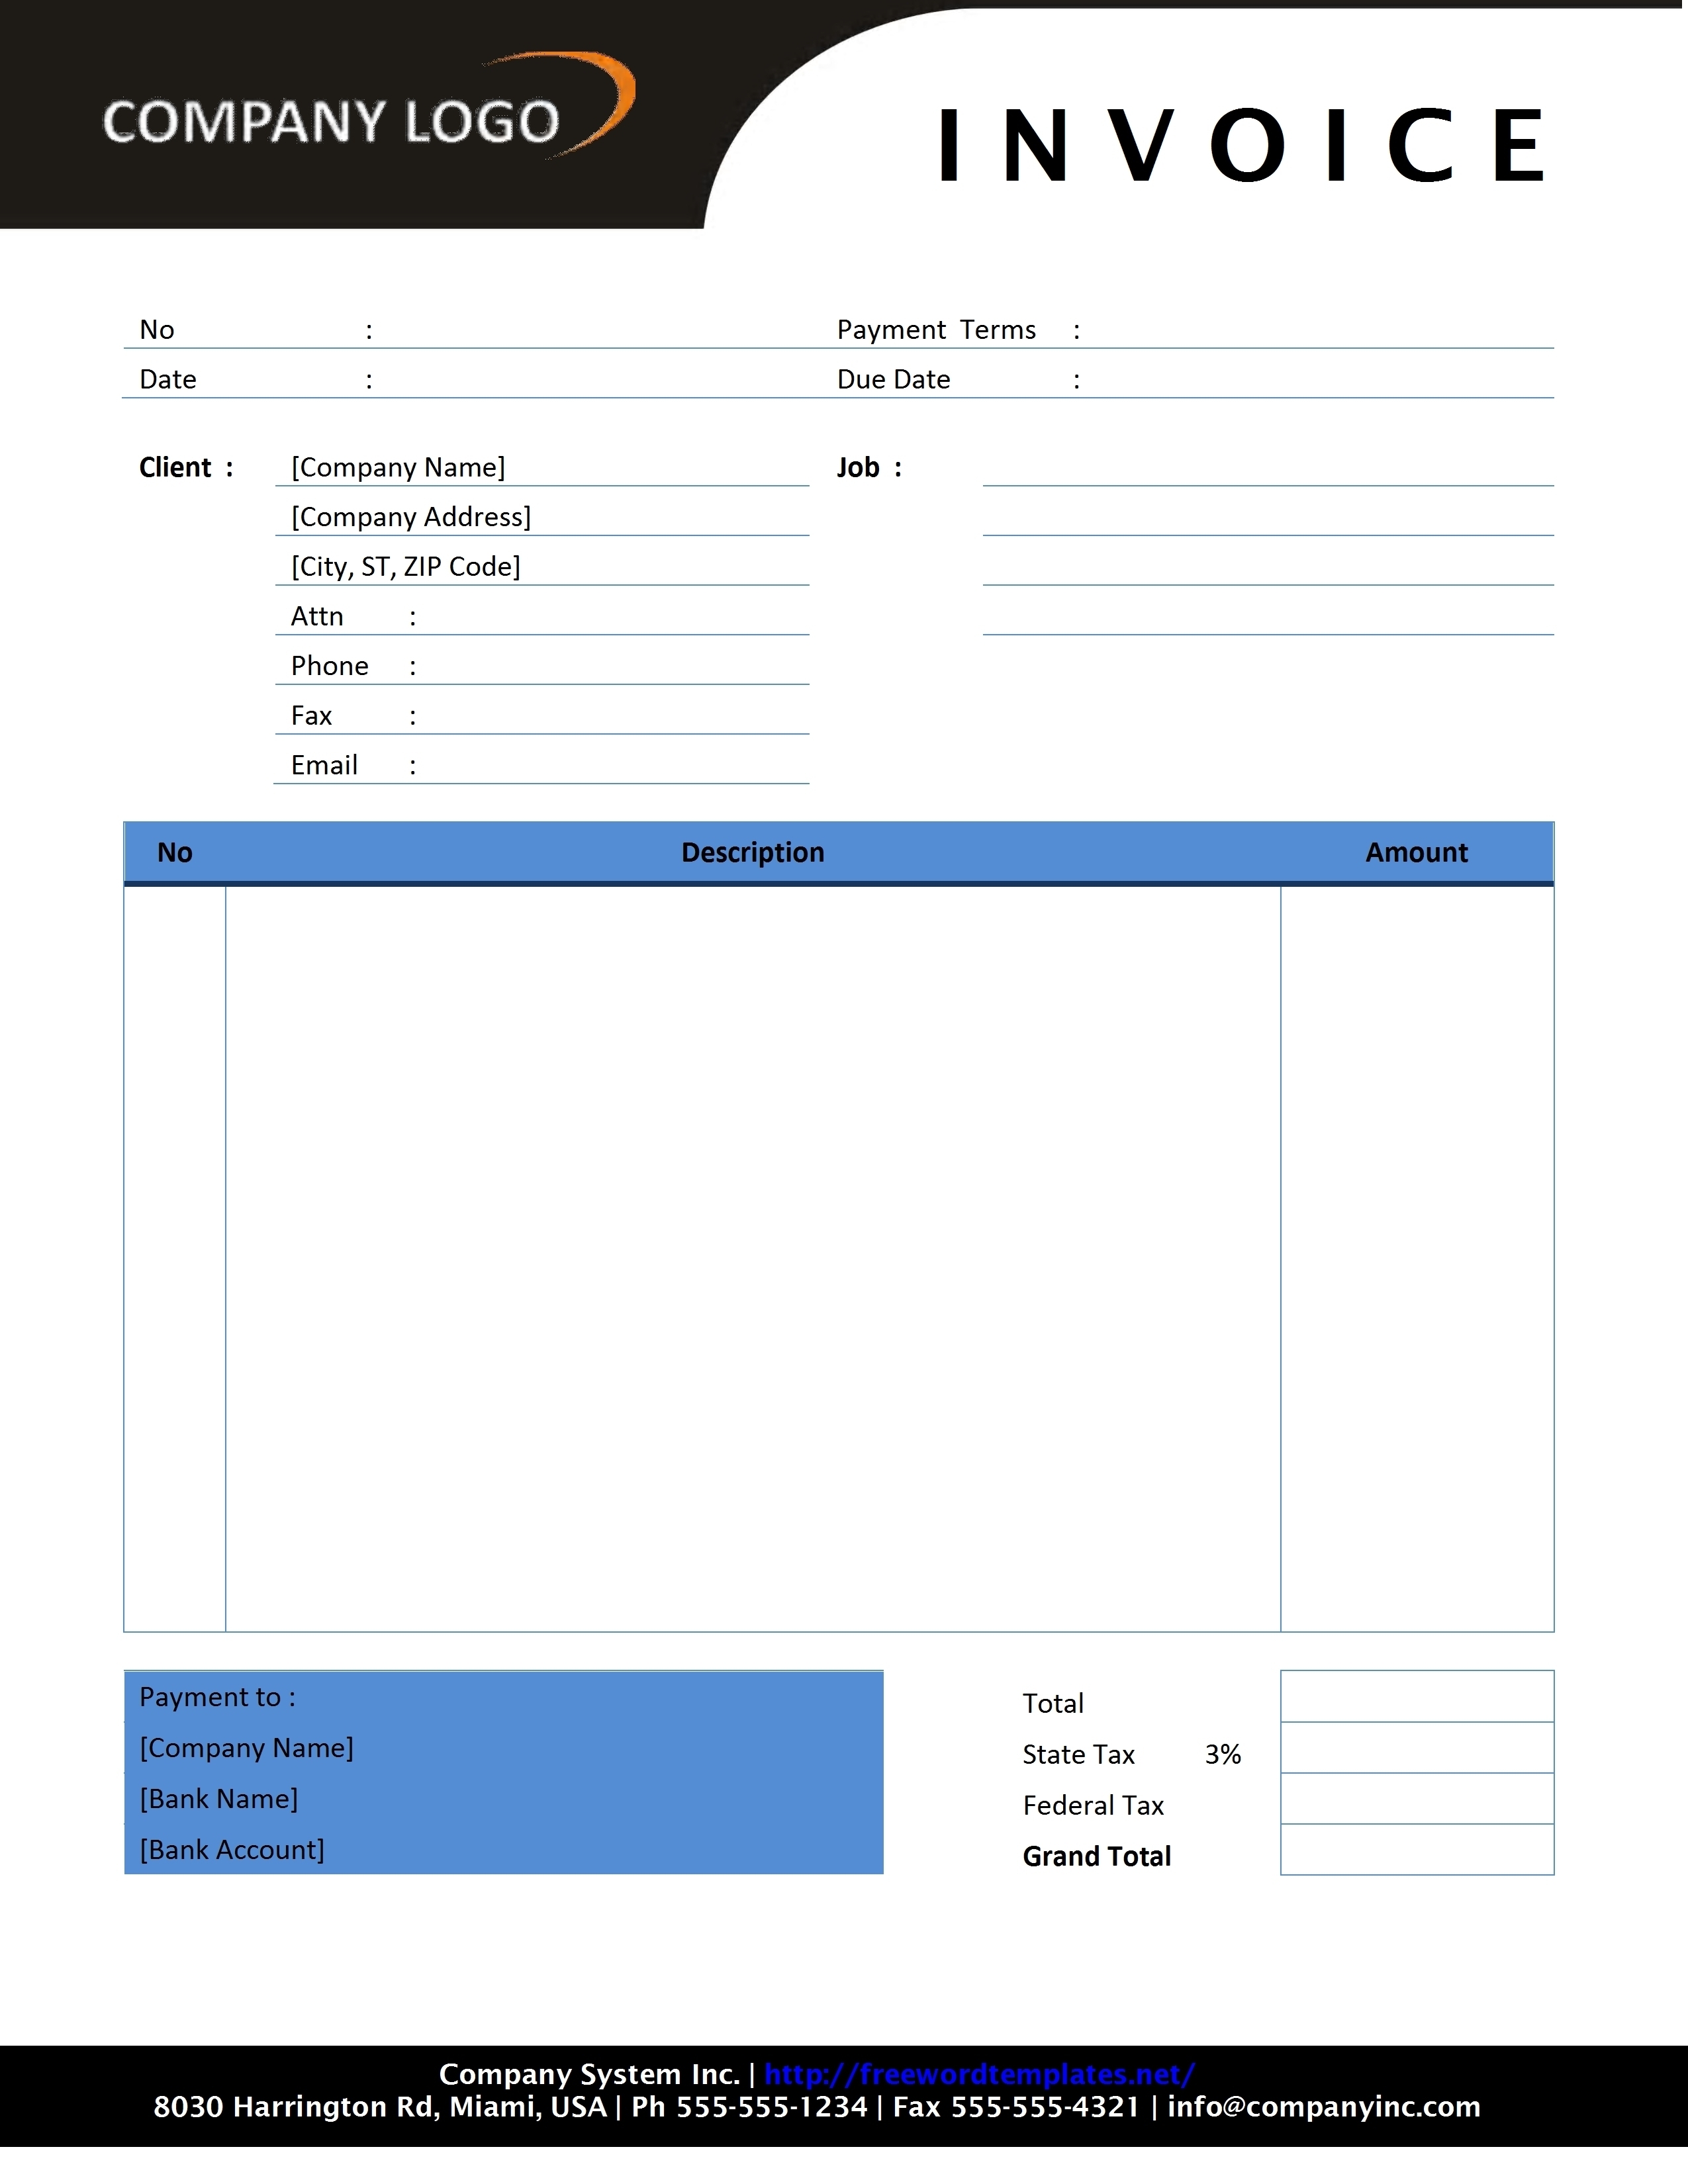 Create A Invoice Template In Word Eogase